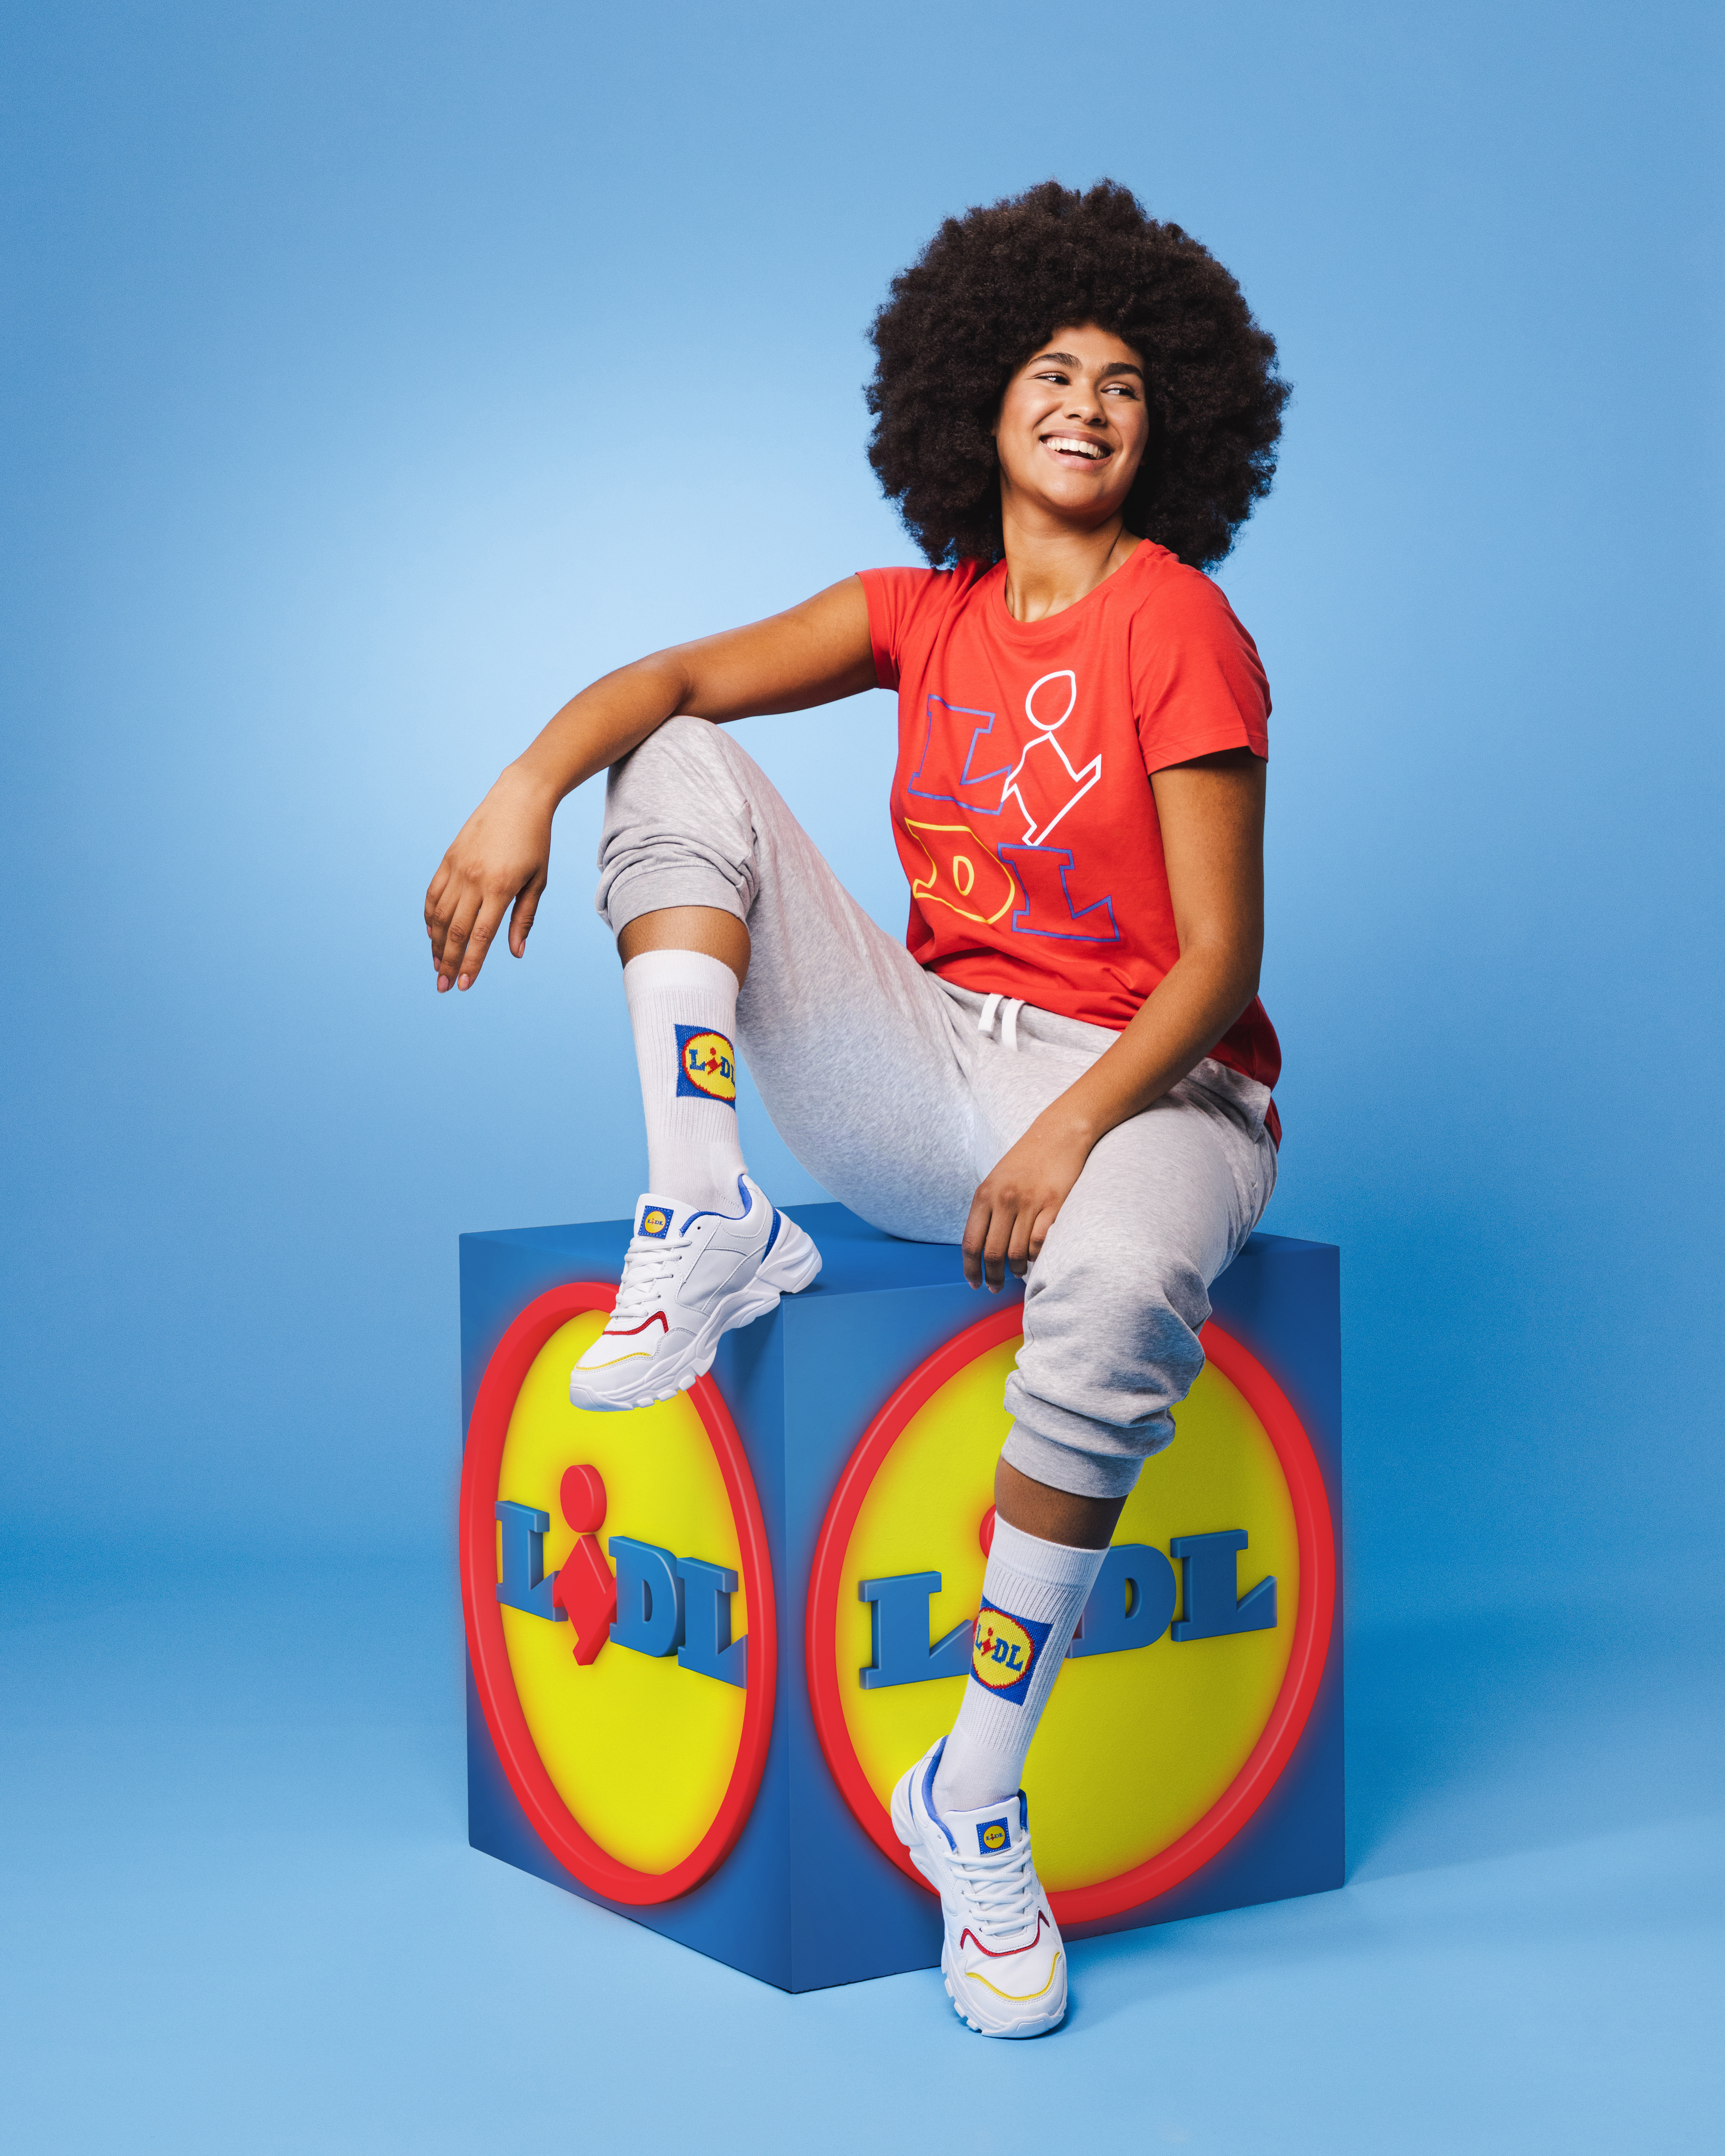 THE UNEXPECTED SUCCESS OF LIDL SNEAKERS • MVC Magazine